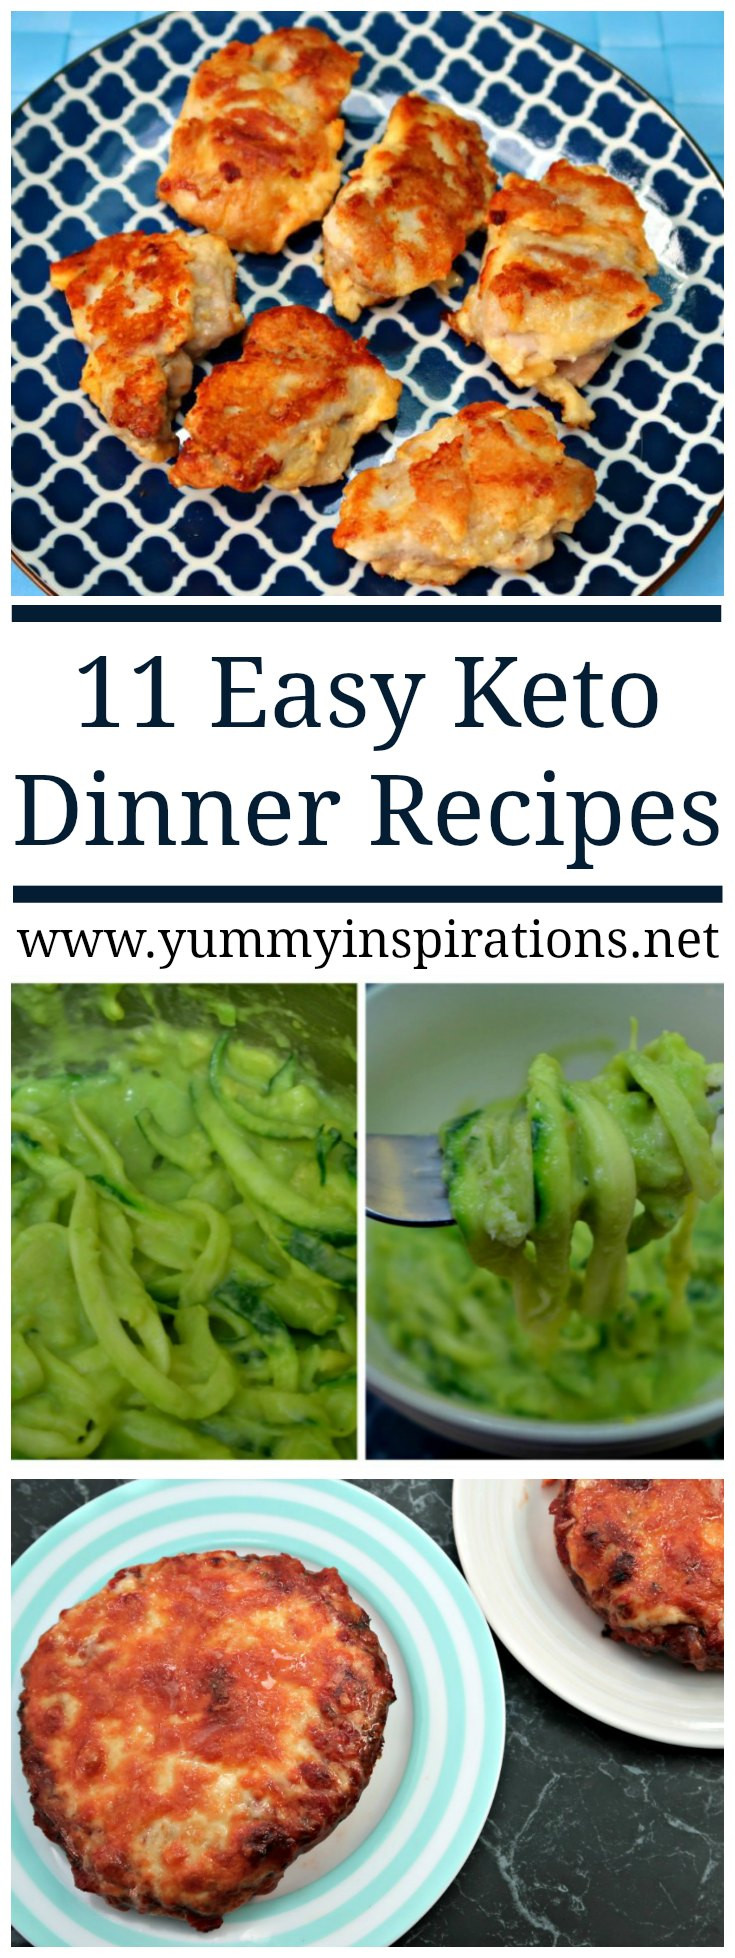 Low Carb Dinner Ideas Easy
 11 Easy Keto Dinner Recipes Quick Low Carb Ketogenic